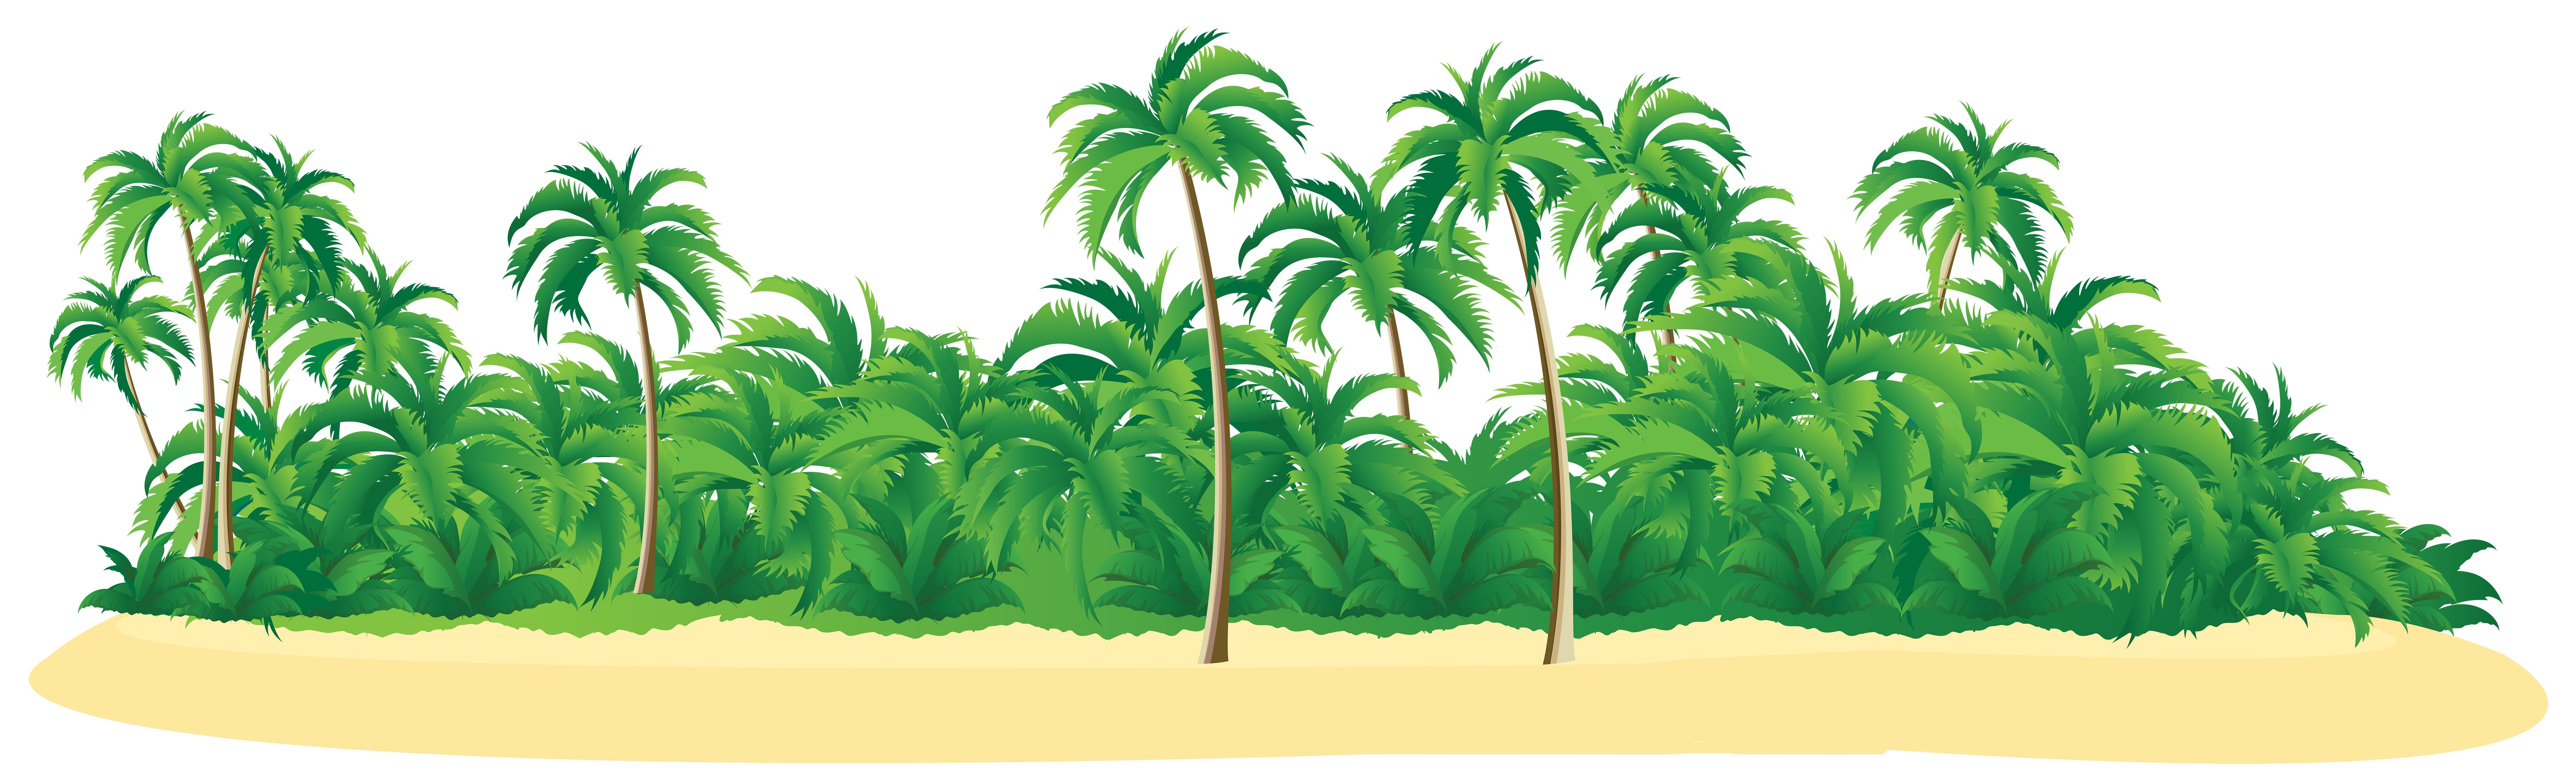 Summer Tropical Island with Palm Trees PNG Clip Art Image